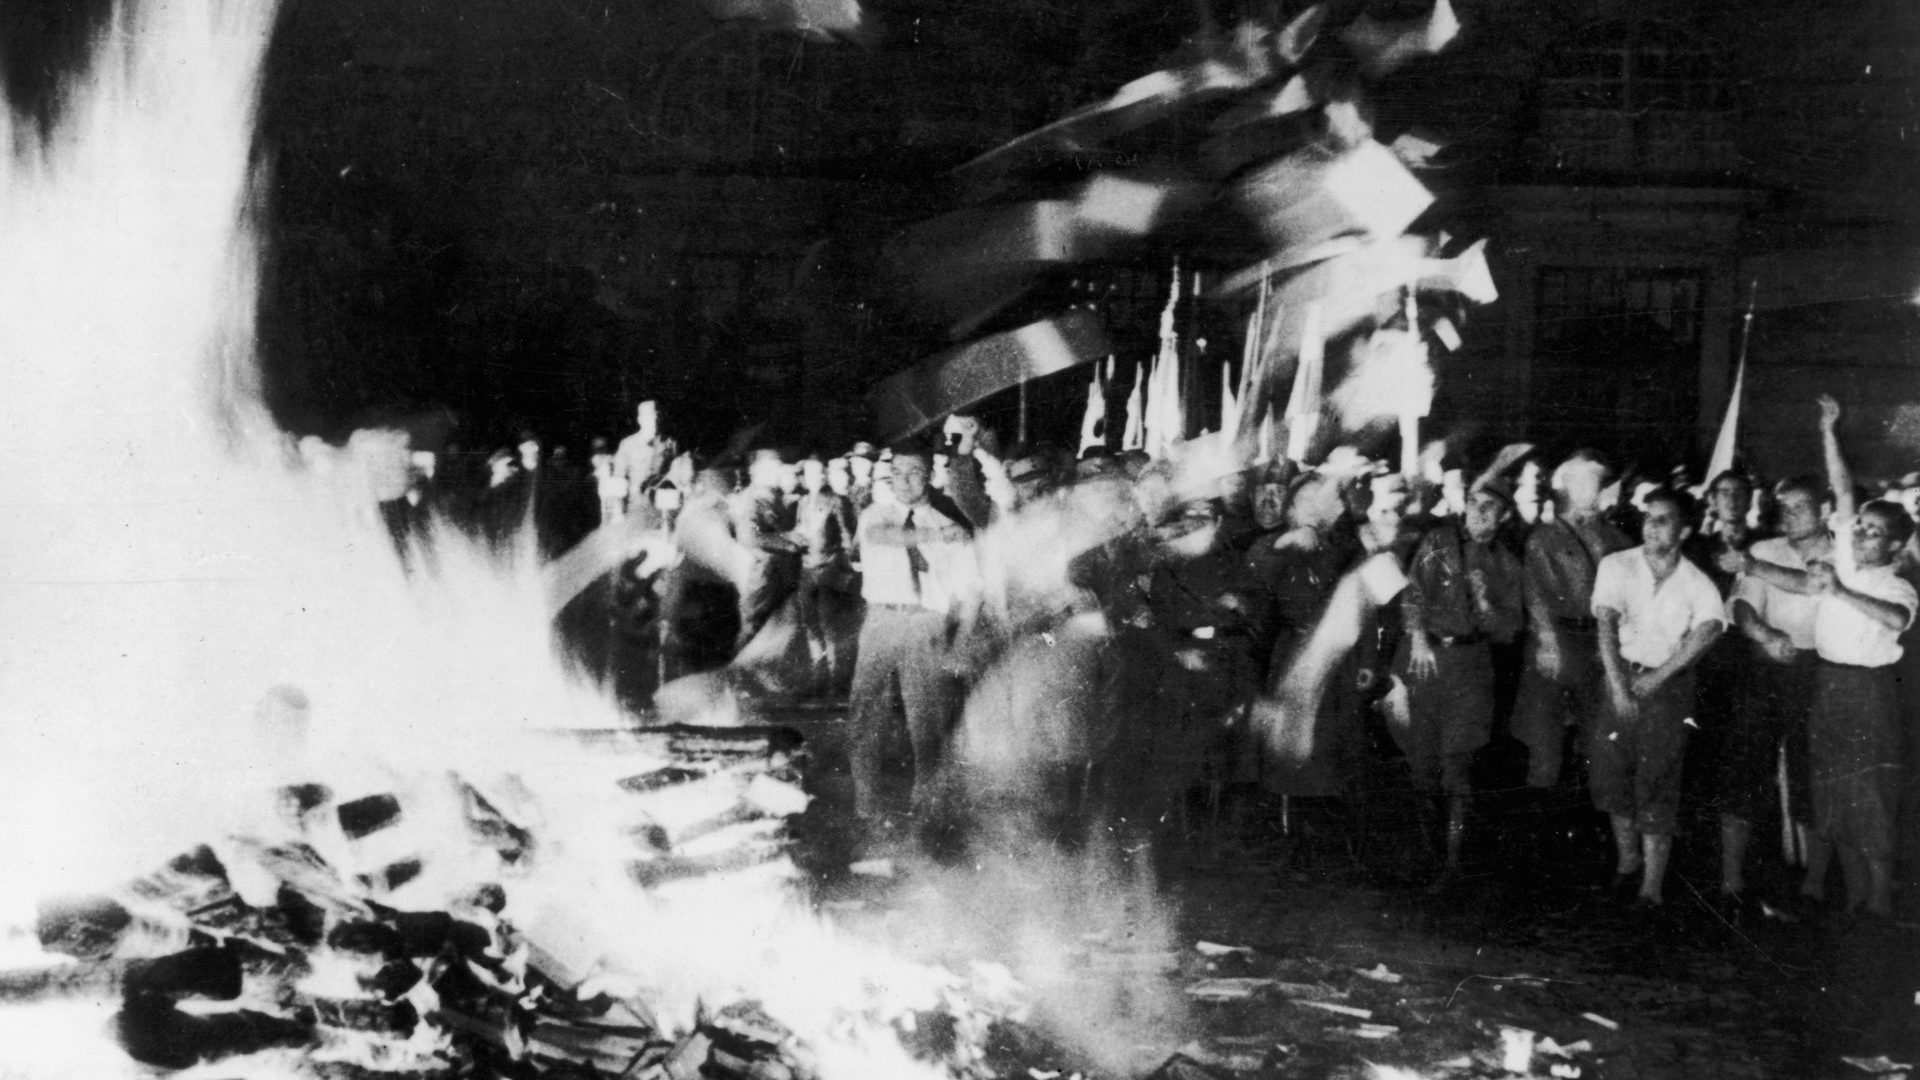 Nazis and students burn “anti-German literature” in the Opernplatz, Berlin on May 10, 1933 – including books by Erich Kästner, who attended the bonfire in secret. Photo: Keystone